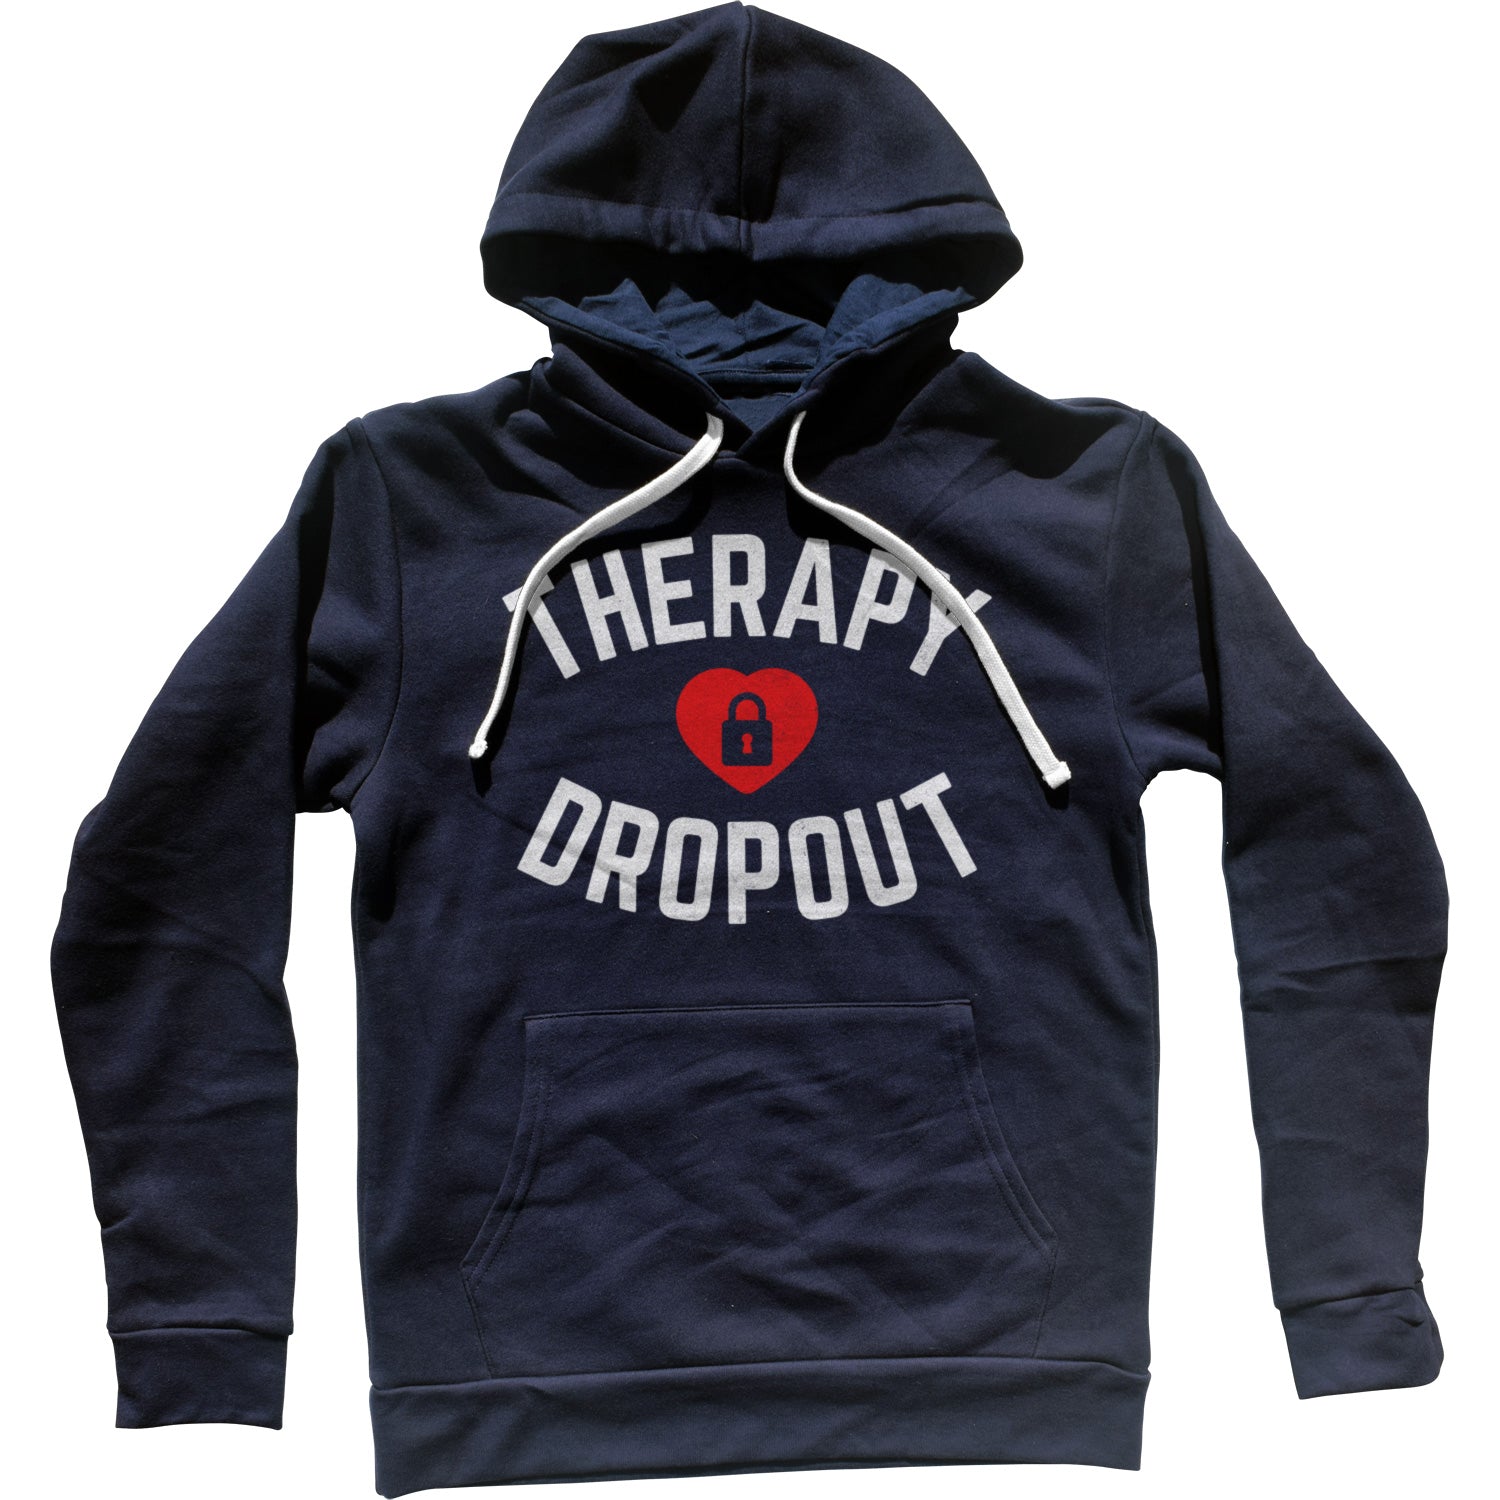 Therapy Dropout Unisex Hoodie